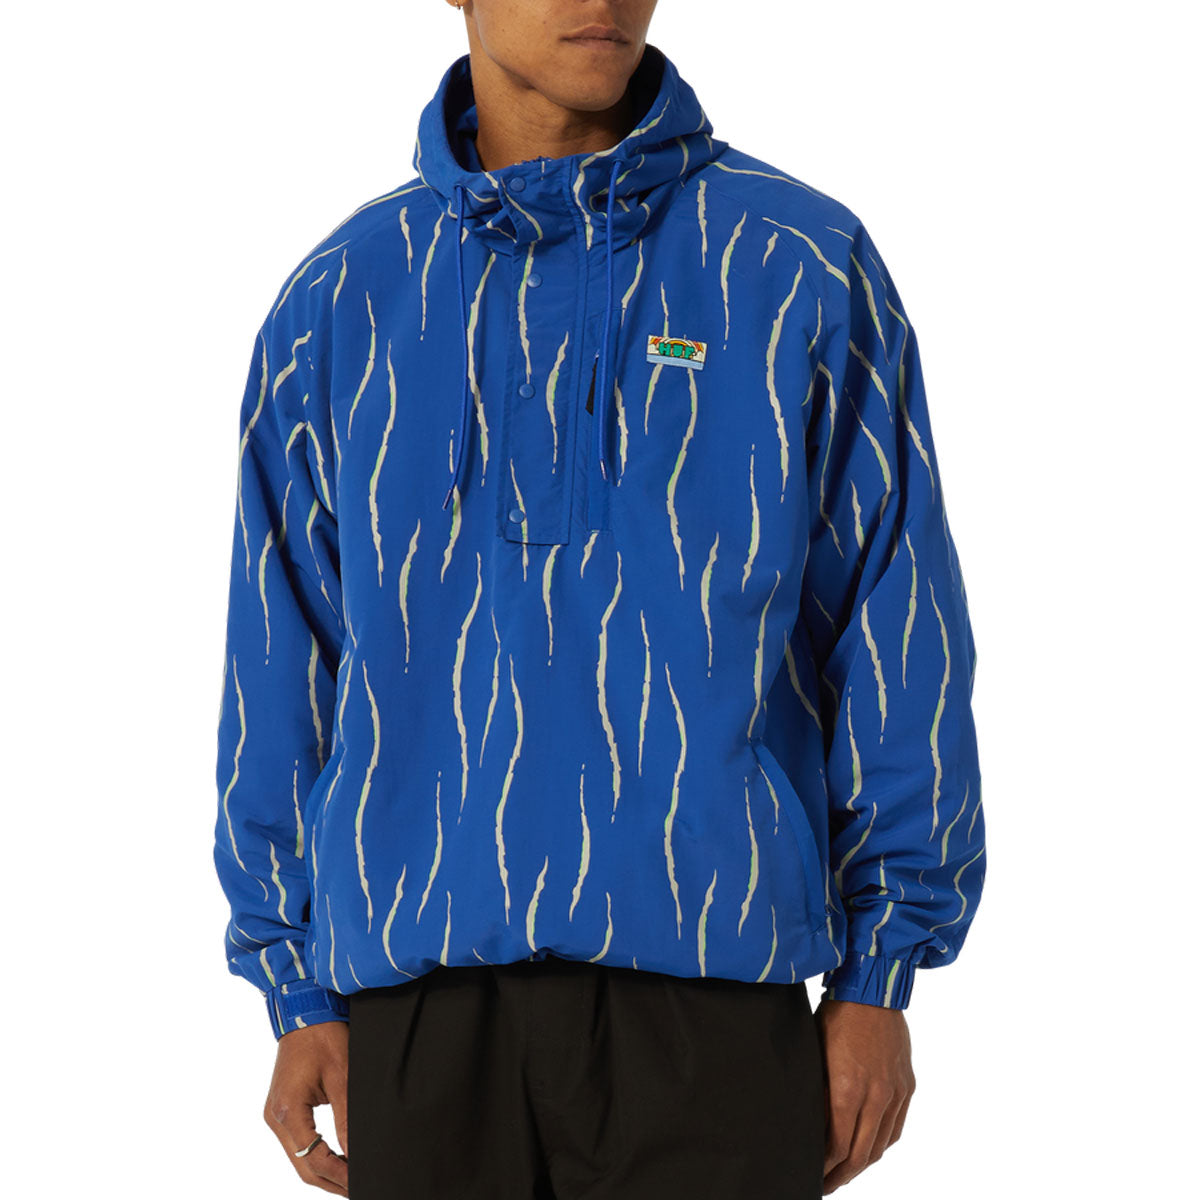 HUF New Day Striped Packable Anorak Jacket - Blue image 1